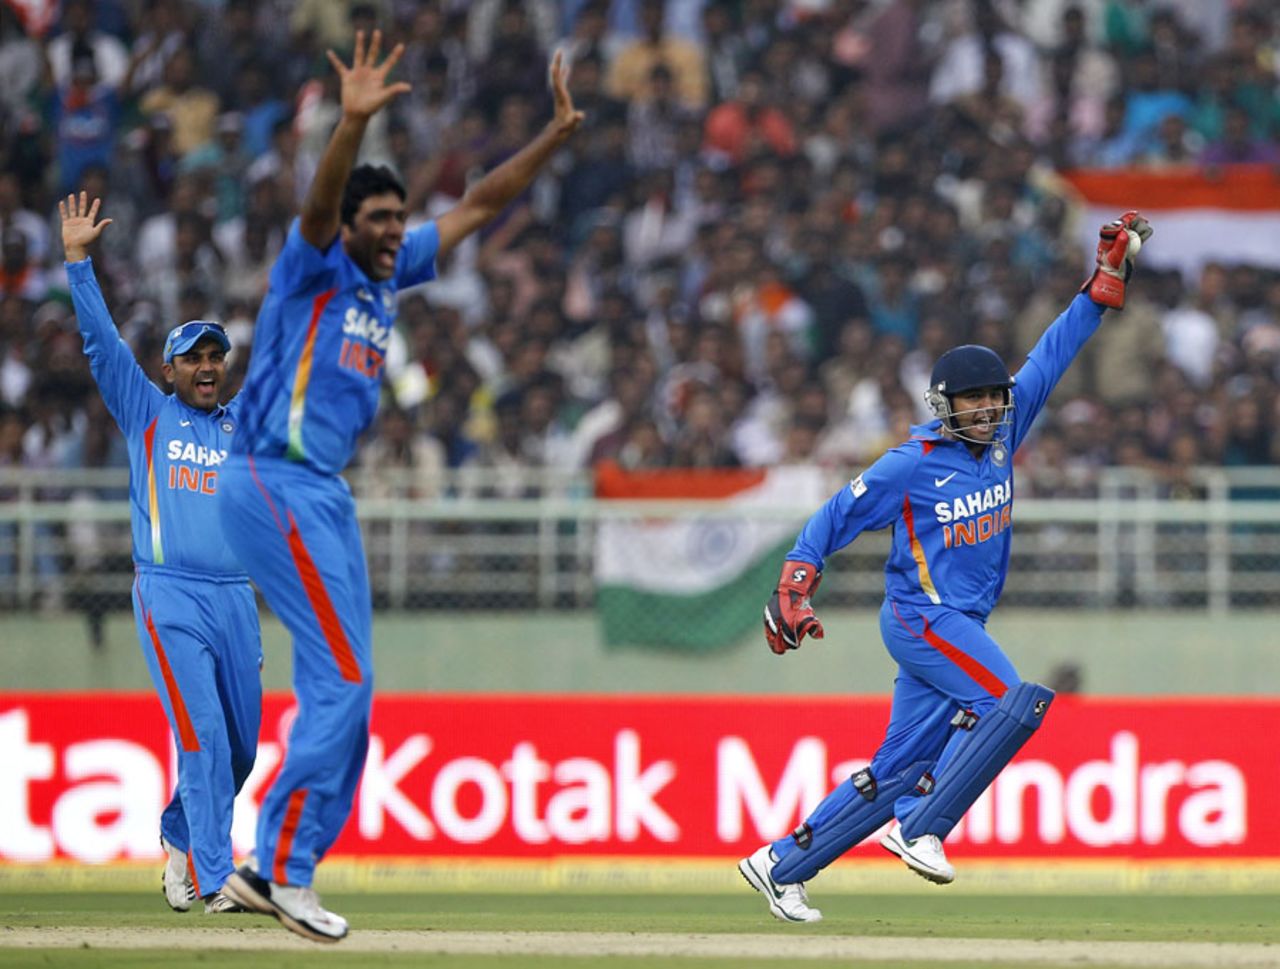 India appeal successfully for Kieron Pollard's wicket, India v West Indies, 2nd ODI, Visakhapatnam, December 2, 2011